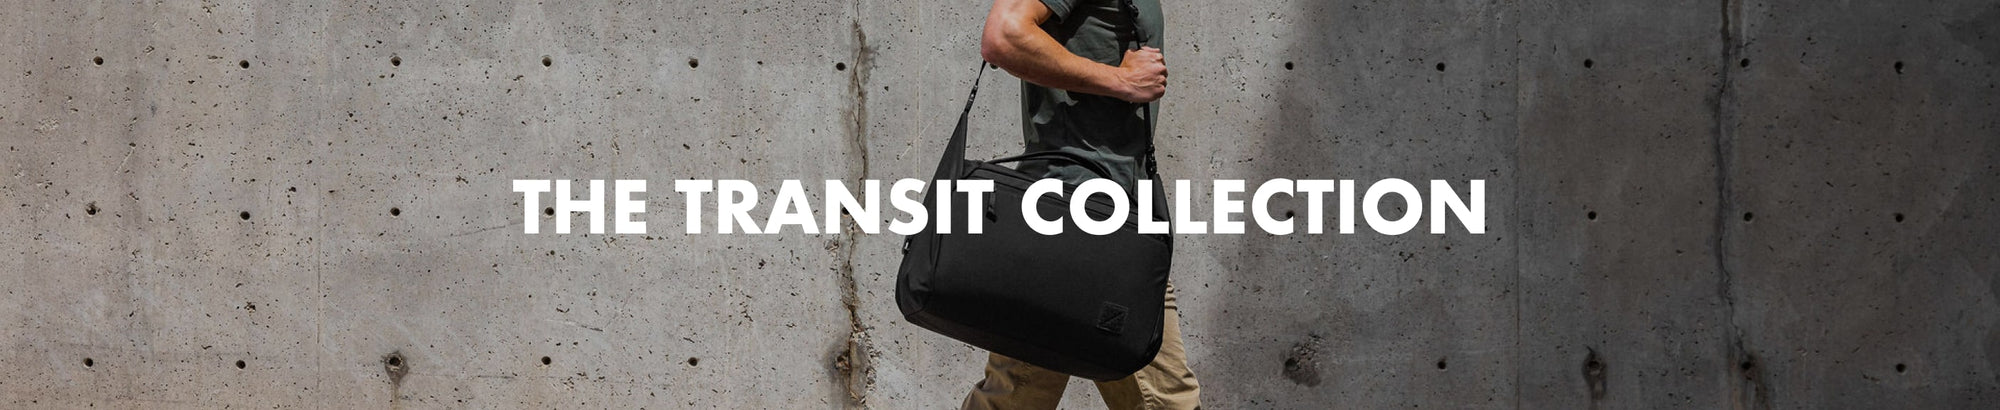 The Transit Collection